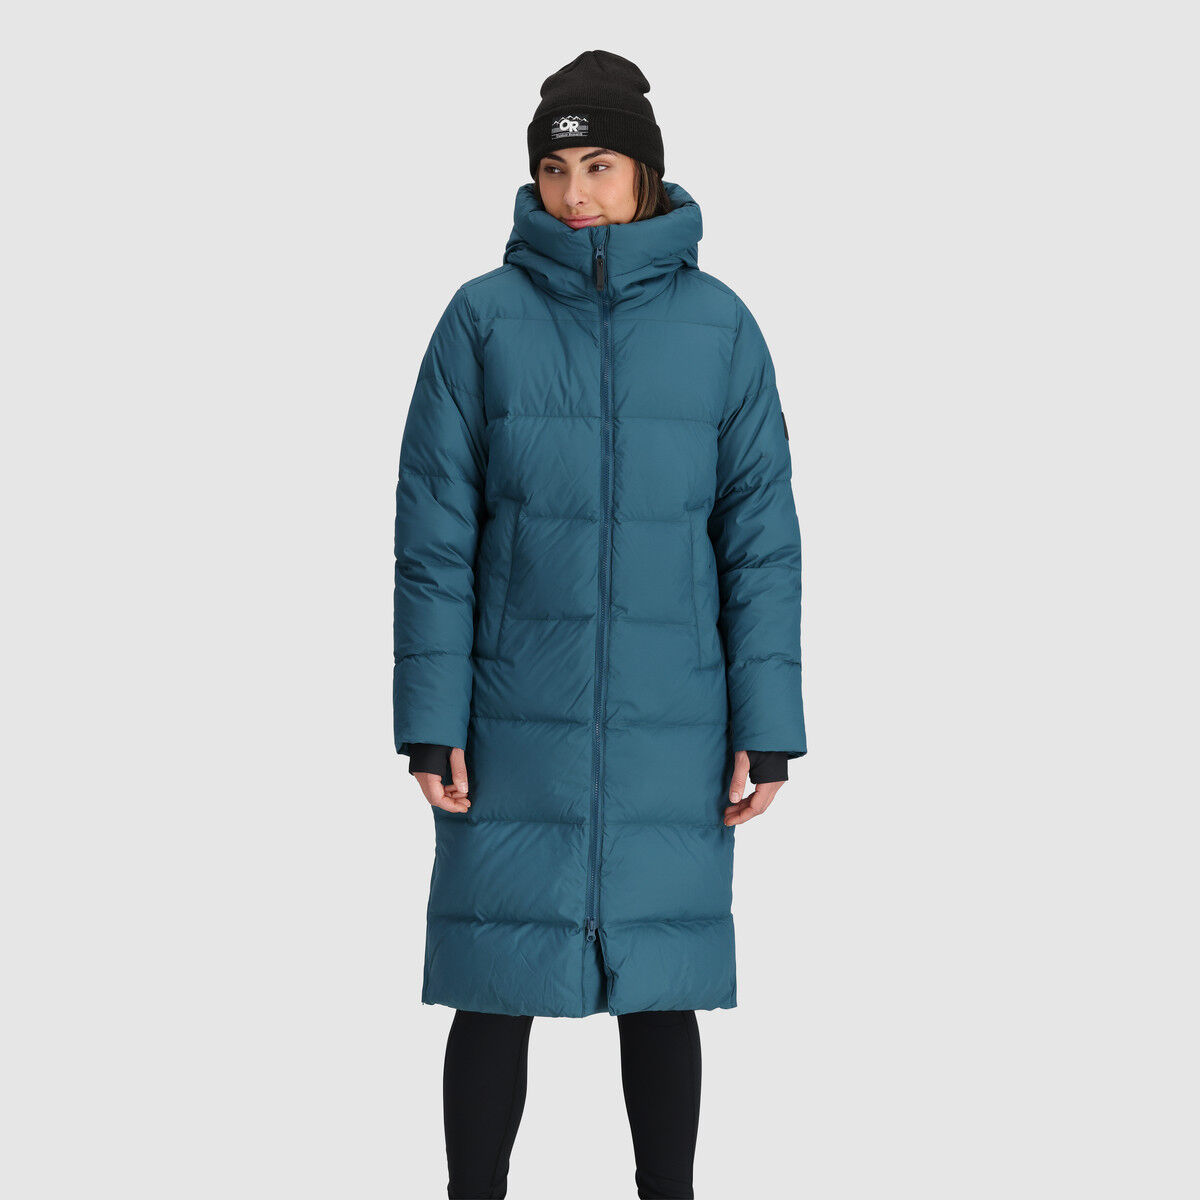 Outdoor Research Coze Down Parka - Parka femme | Hardloop